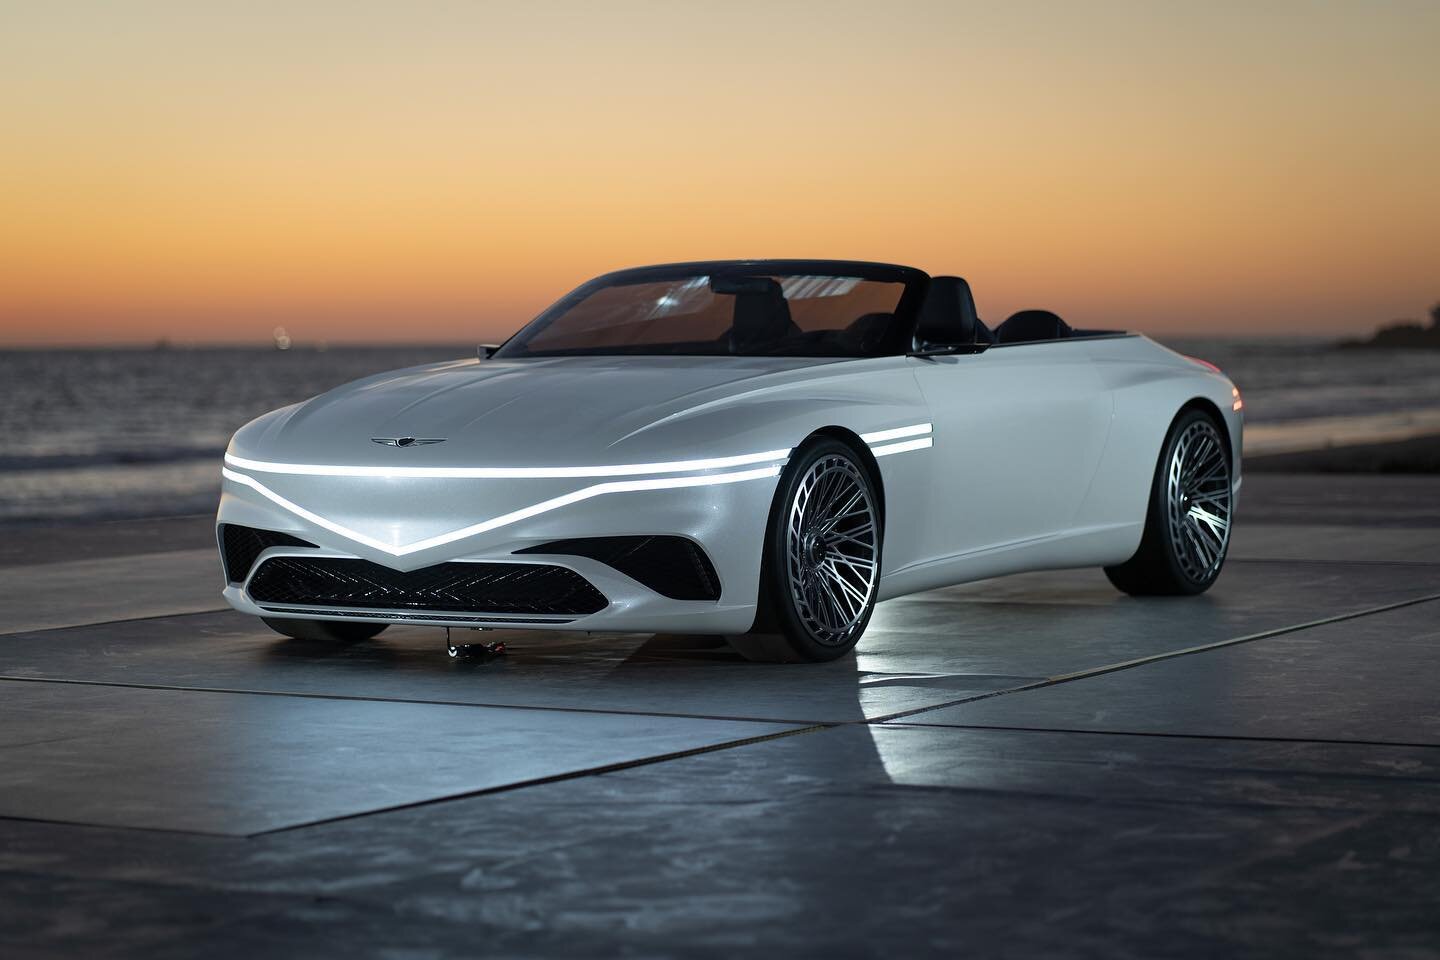 I should shoot every car at sunset. The Genesis X Convertible concept looks amazing and this light is really helping it pop.

#Genesis #genesisxconvertible #convertible #electriccar #conceptcar